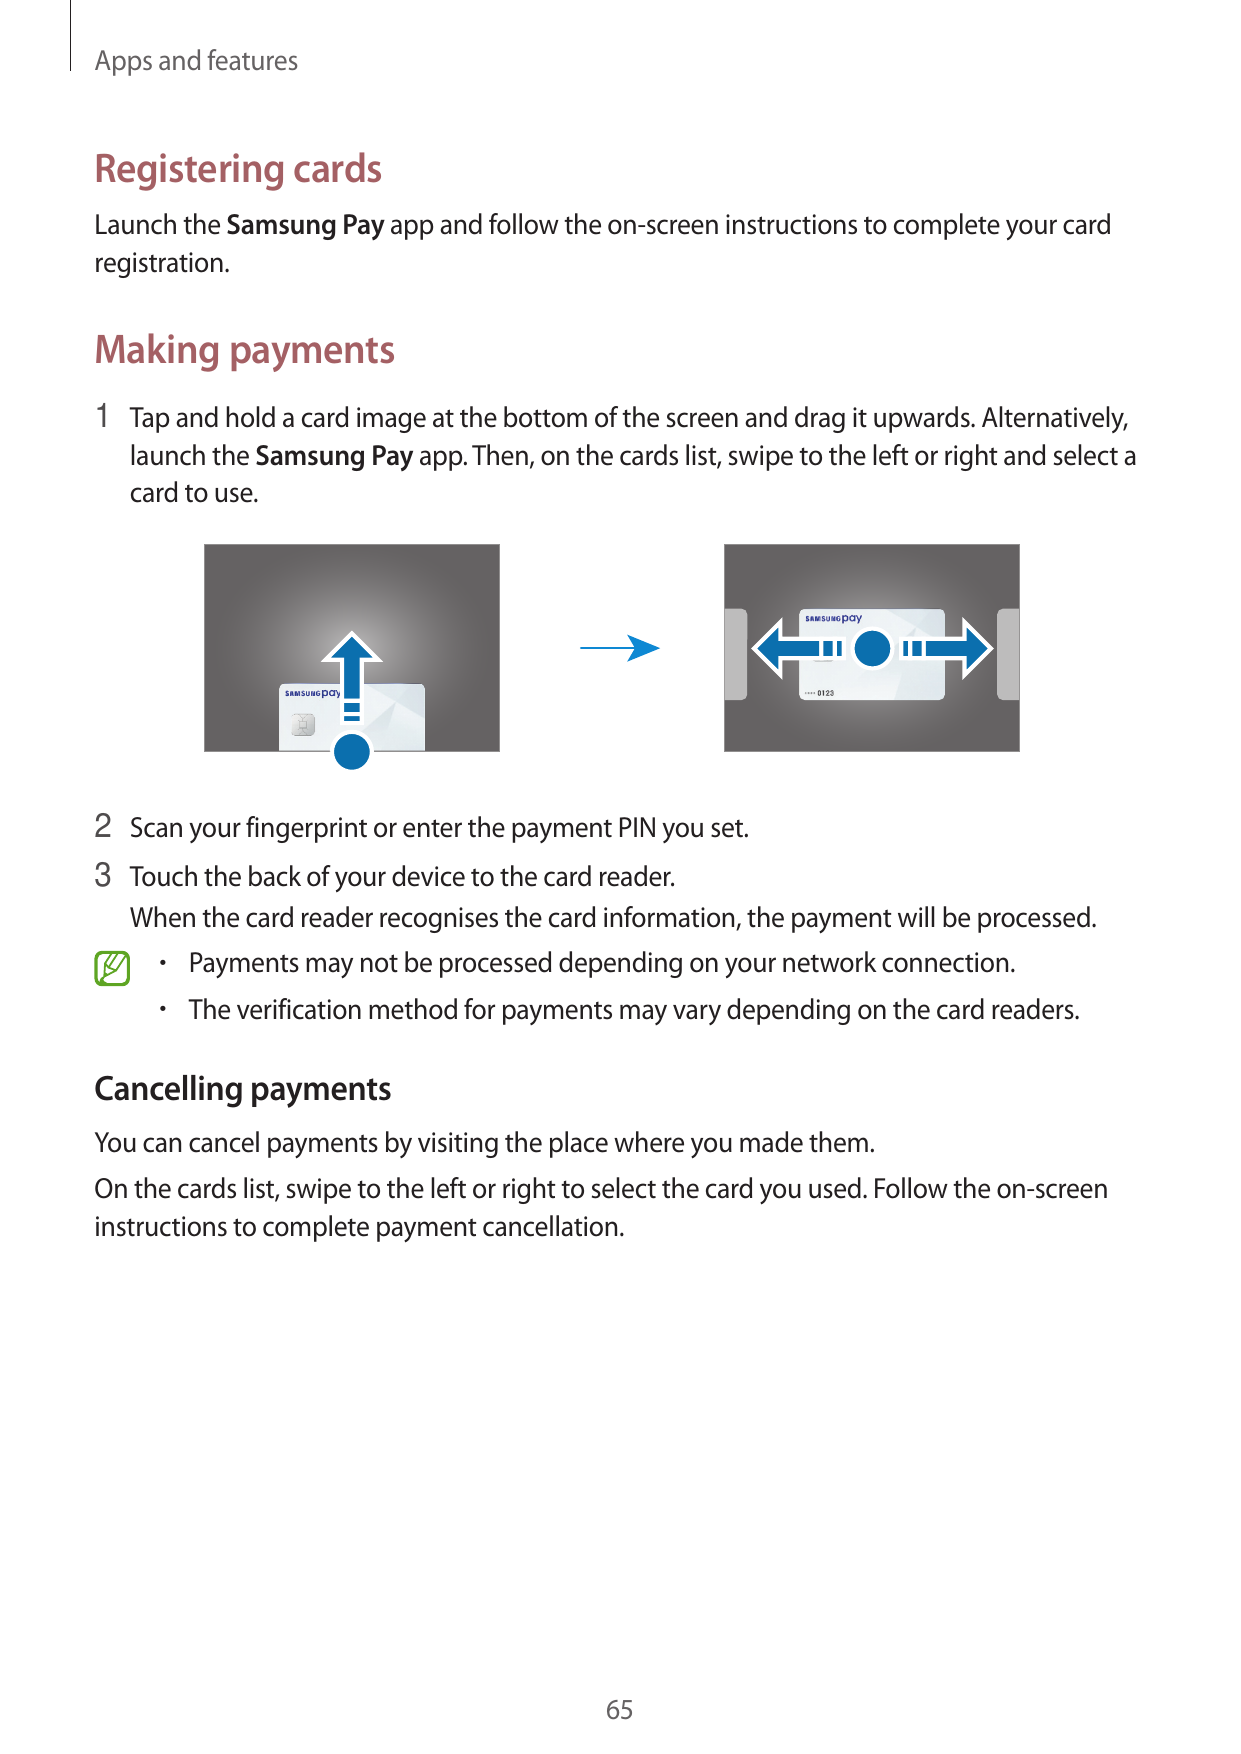 Apps and featuresRegistering cardsLaunch the Samsung Pay app and follow the on-screen instructions to complete your cardregistra